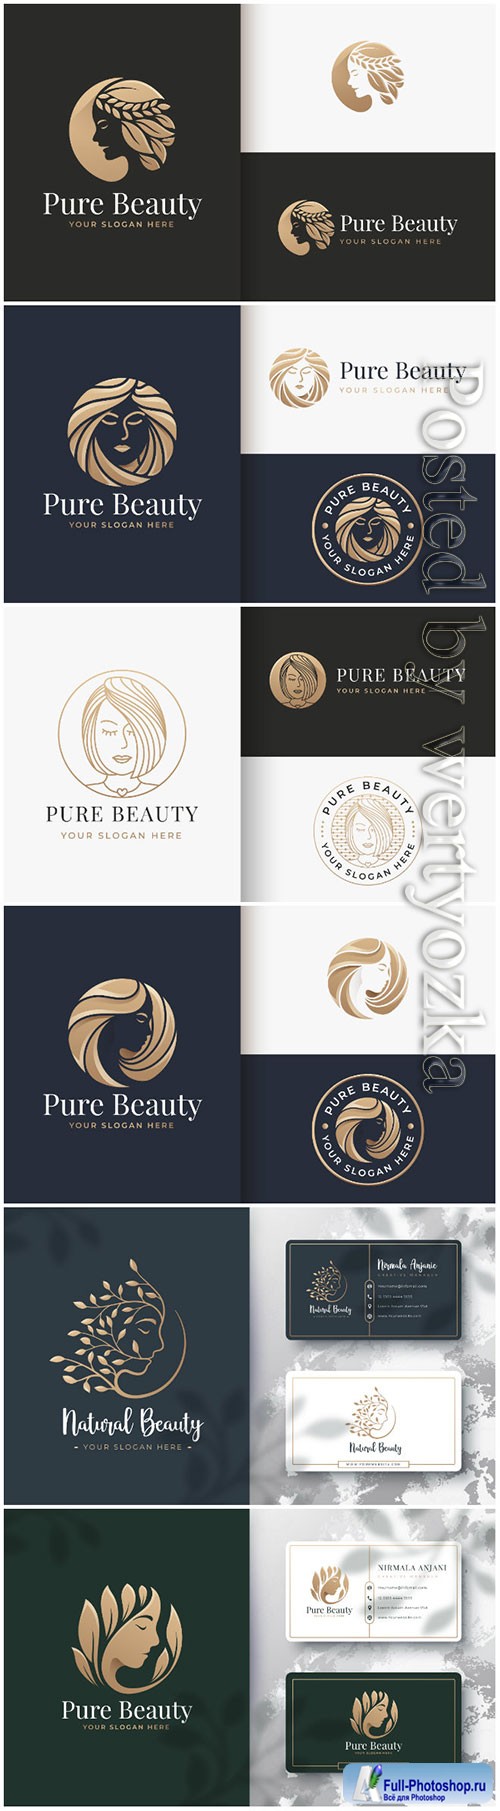 Beauty logo and business card design premium vector